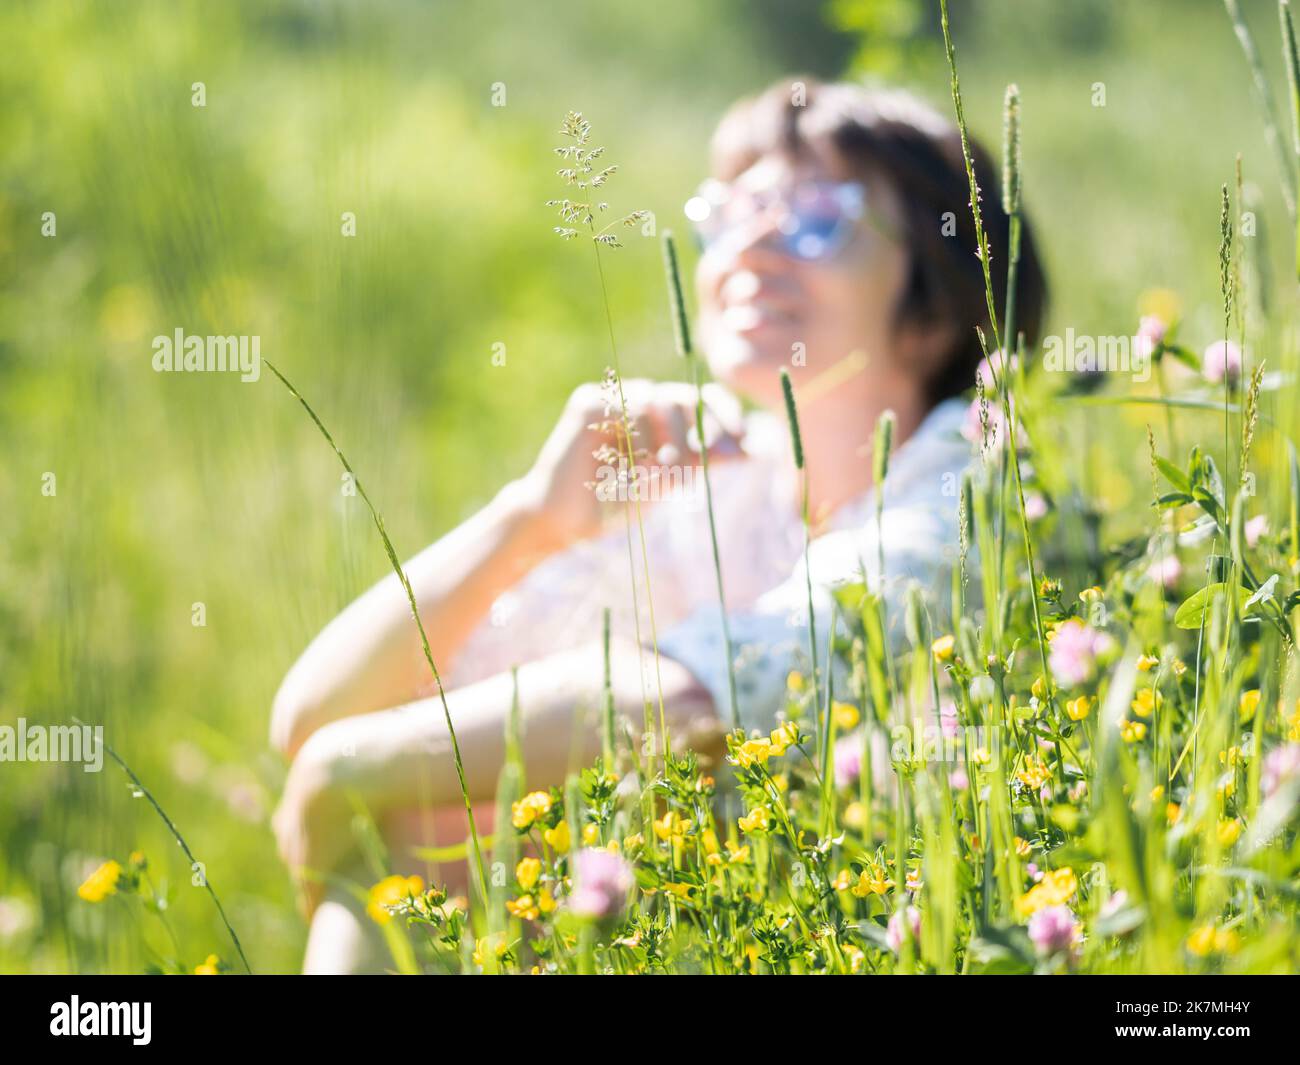 Blurred background with woman in sunglasses. Woman enjoys sunlight and flower fragrance on grass field. Summer vibes. Relax outdoors. Self-soothing. Stock Photo